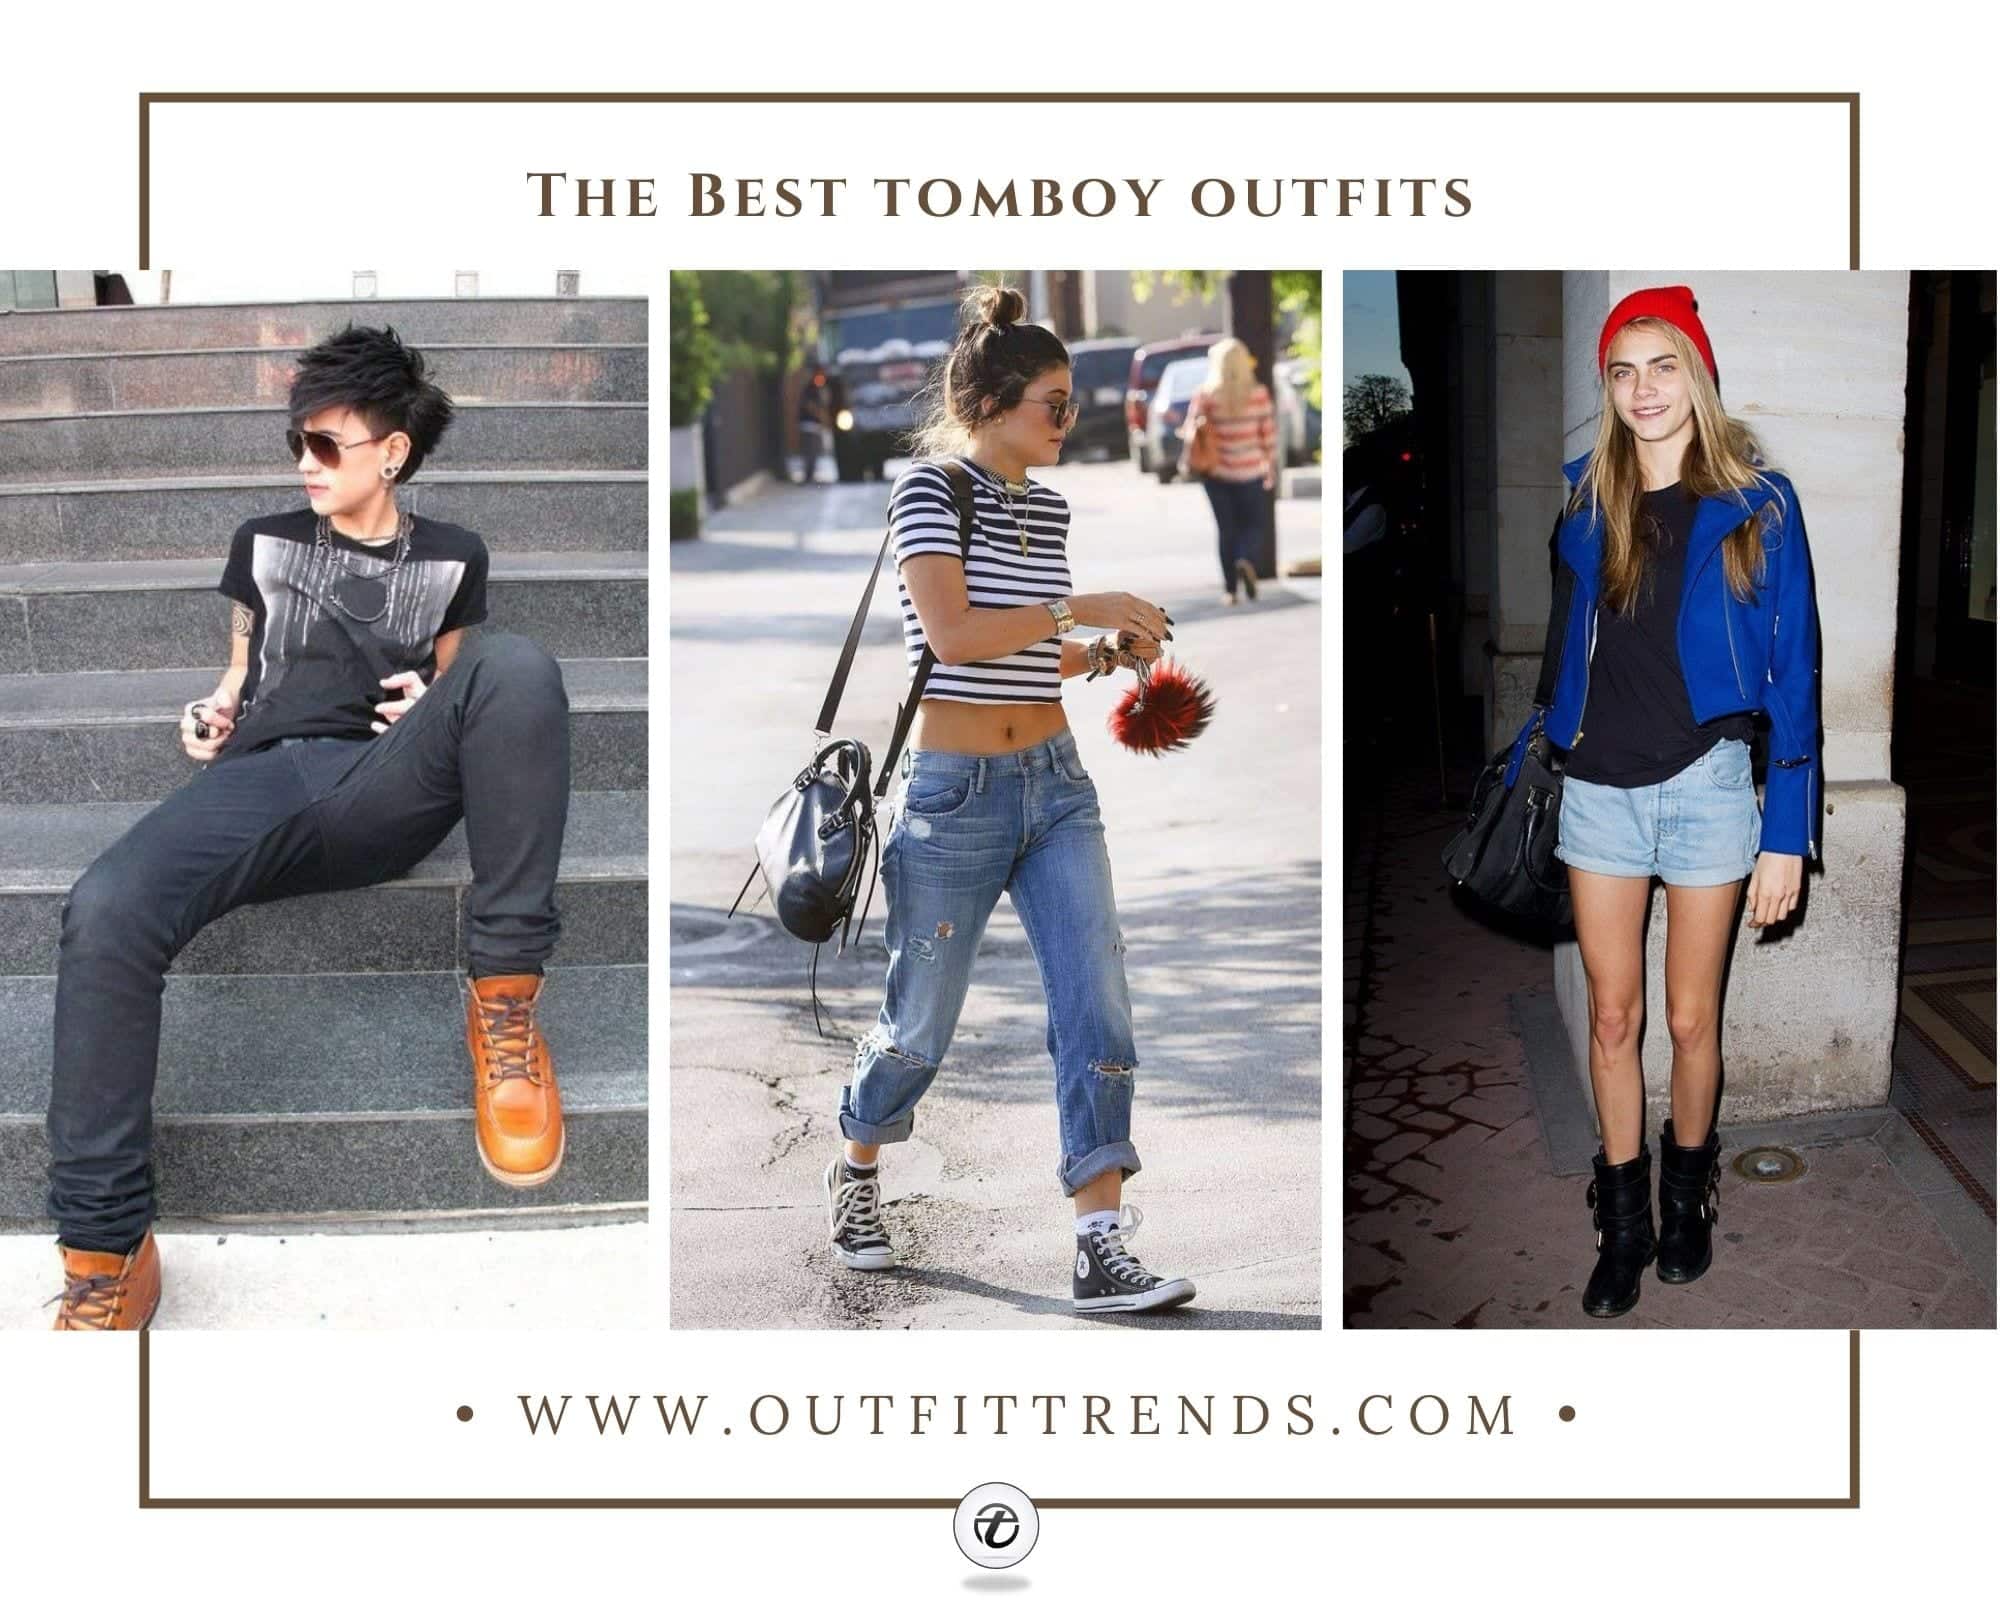 Tomboy Outfits   How to Dress Like Tomboy & 20 Outfit Ideas